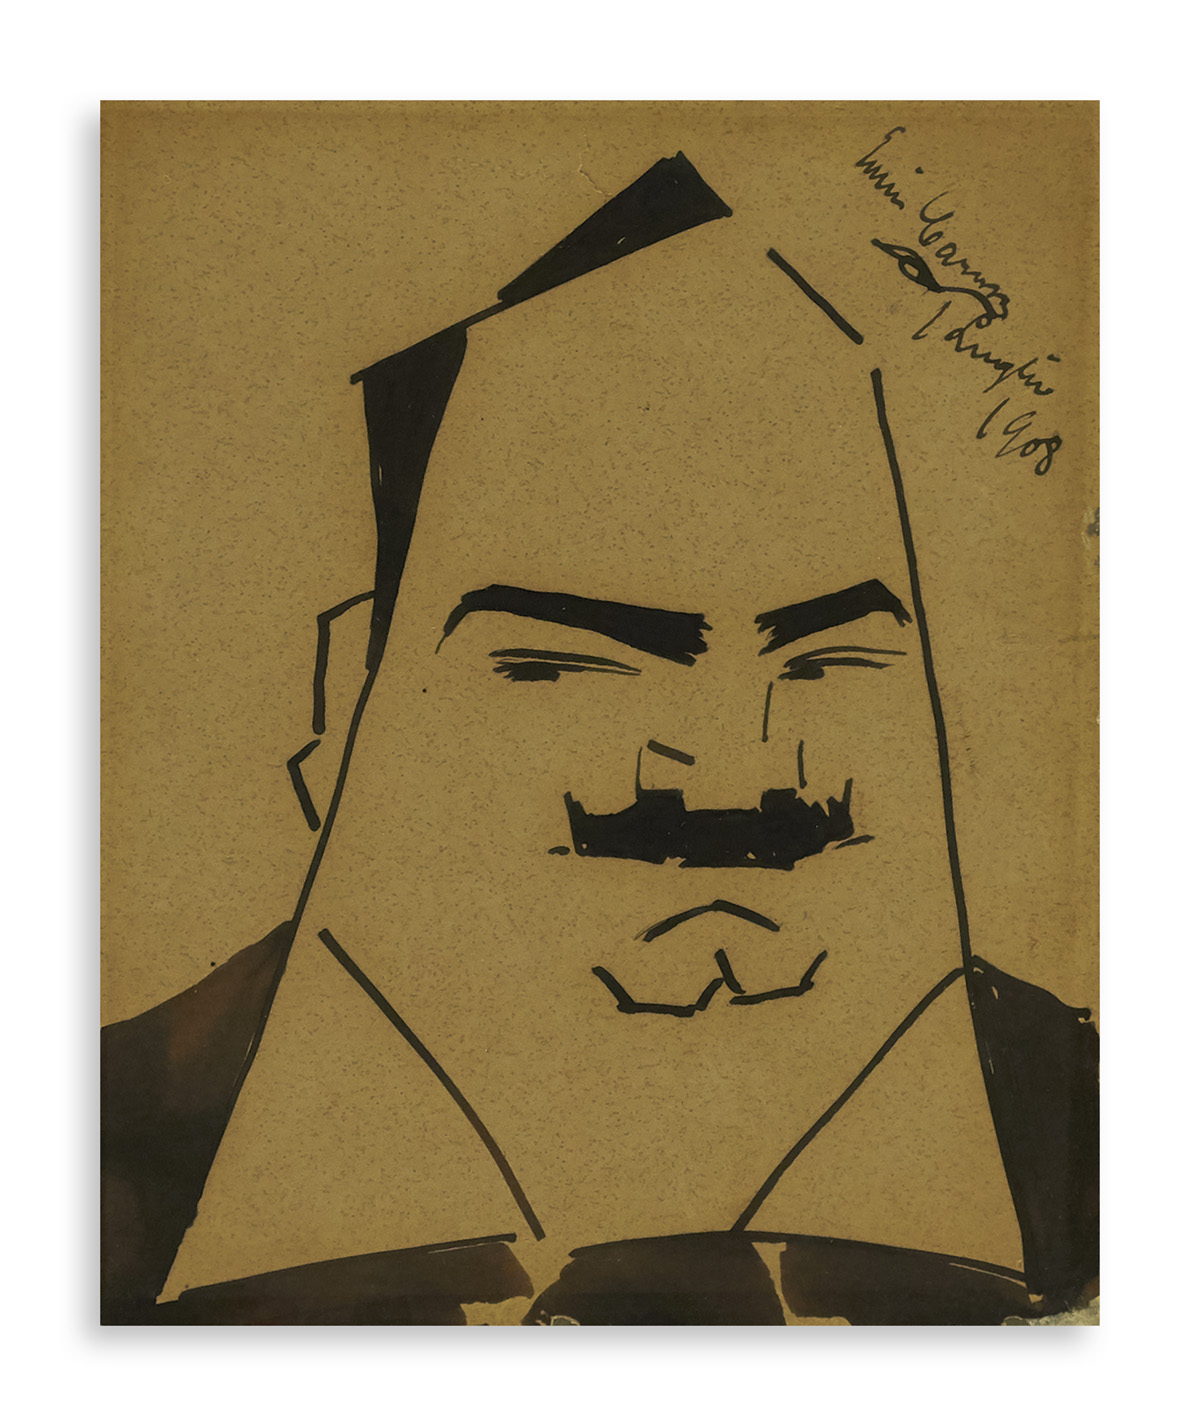 CARUSO, ENRICO. Ink drawing, dated and Signed, self-caricature showing his bust while he makes a sidelong glance.